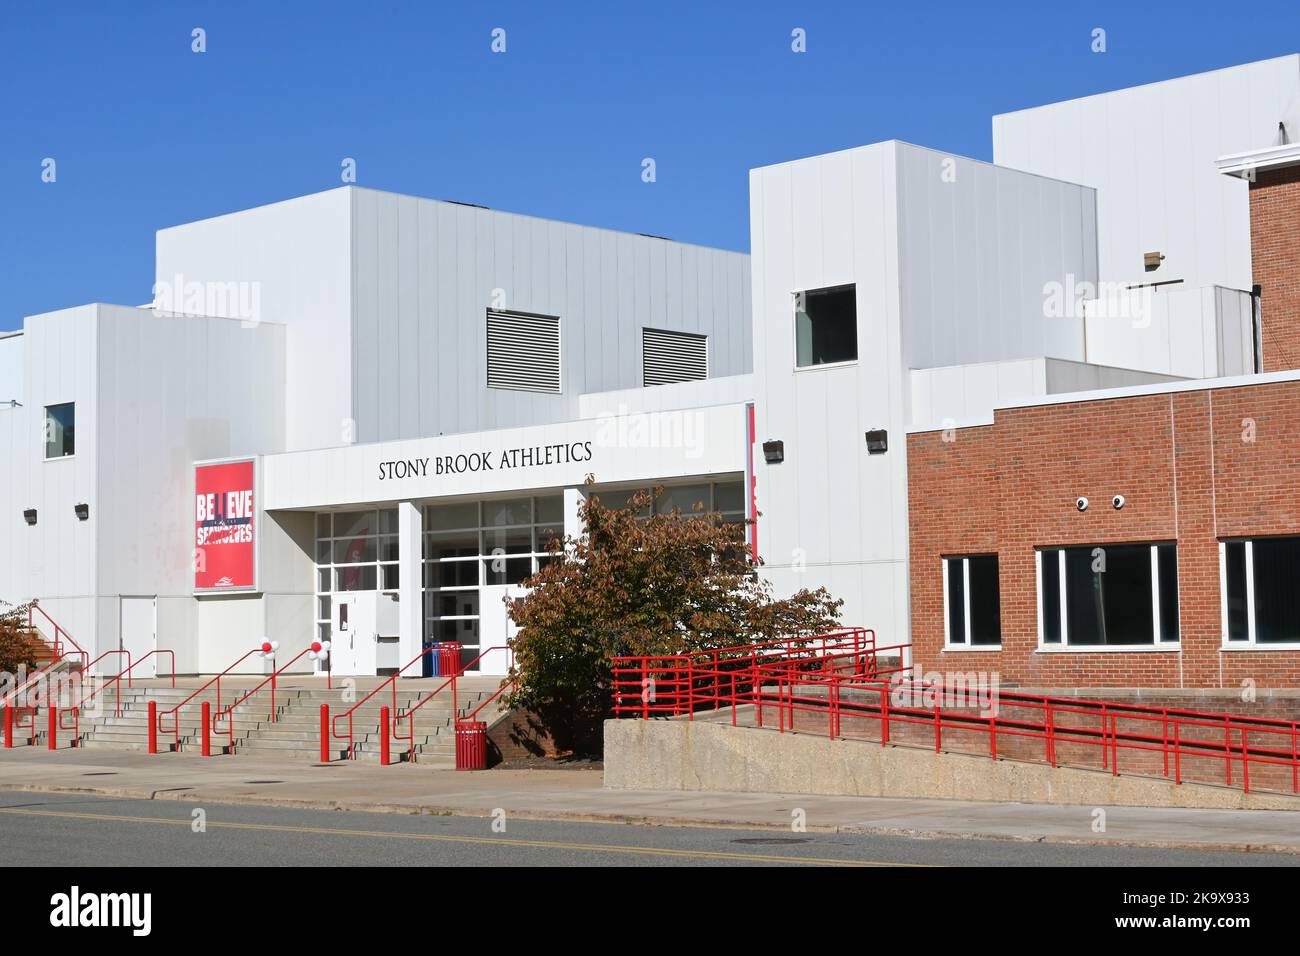 STONY BROOK, NEW YORK - 21 OCT 2022: Island Federal Credit Union Arena, the 4,000-seat home of Stony Brook's men's and women's basketball teams,. Stock Photo